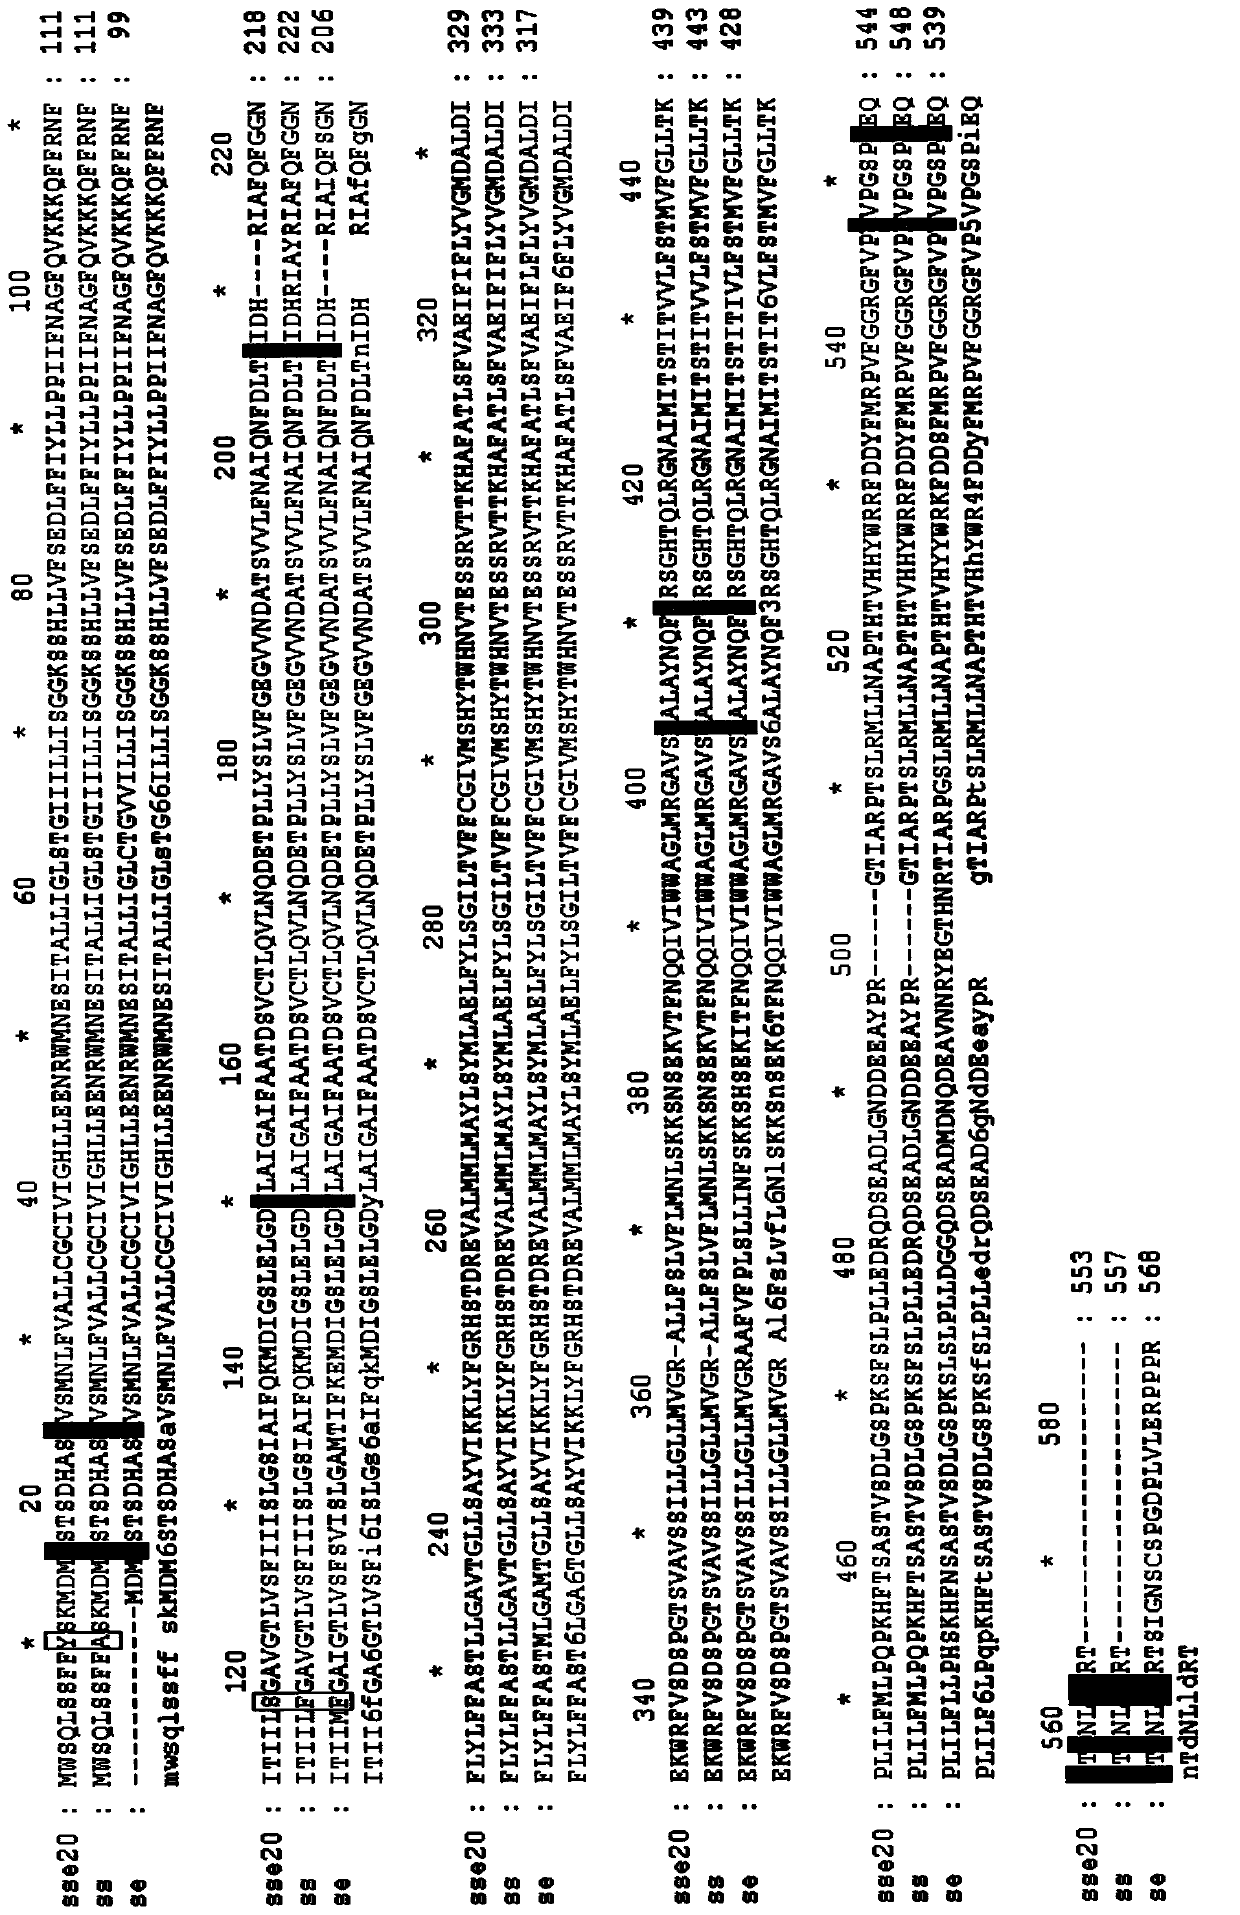 Strong-salt-tolerant plant gene SseNHX1 as well as encoding protein and application of strong-salt-tolerant plant gene SseNHX1